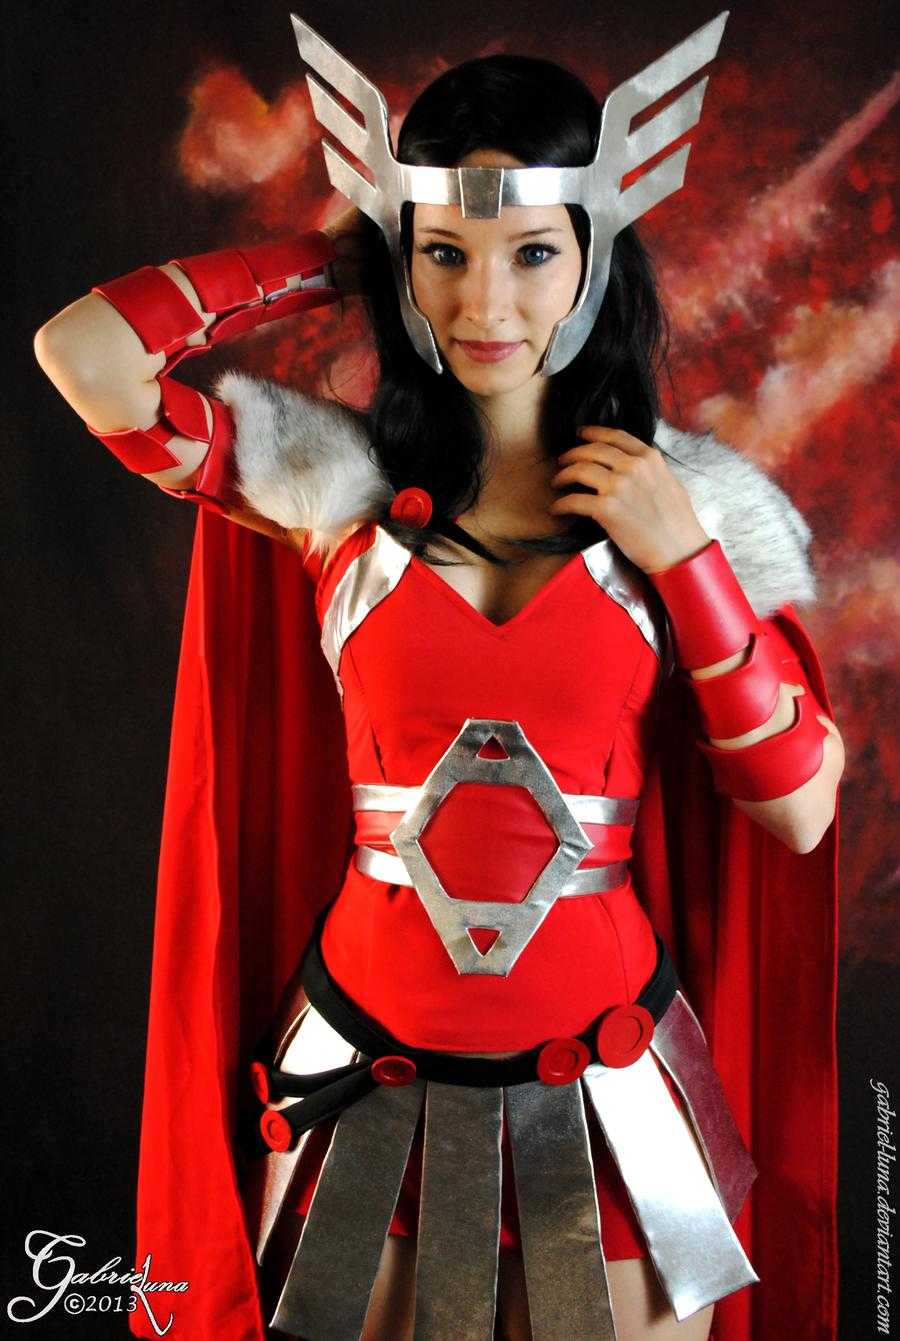 44 Hot Pictures Of Sif Are Simply Excessively Damn Delectable | Best Of Comic Books